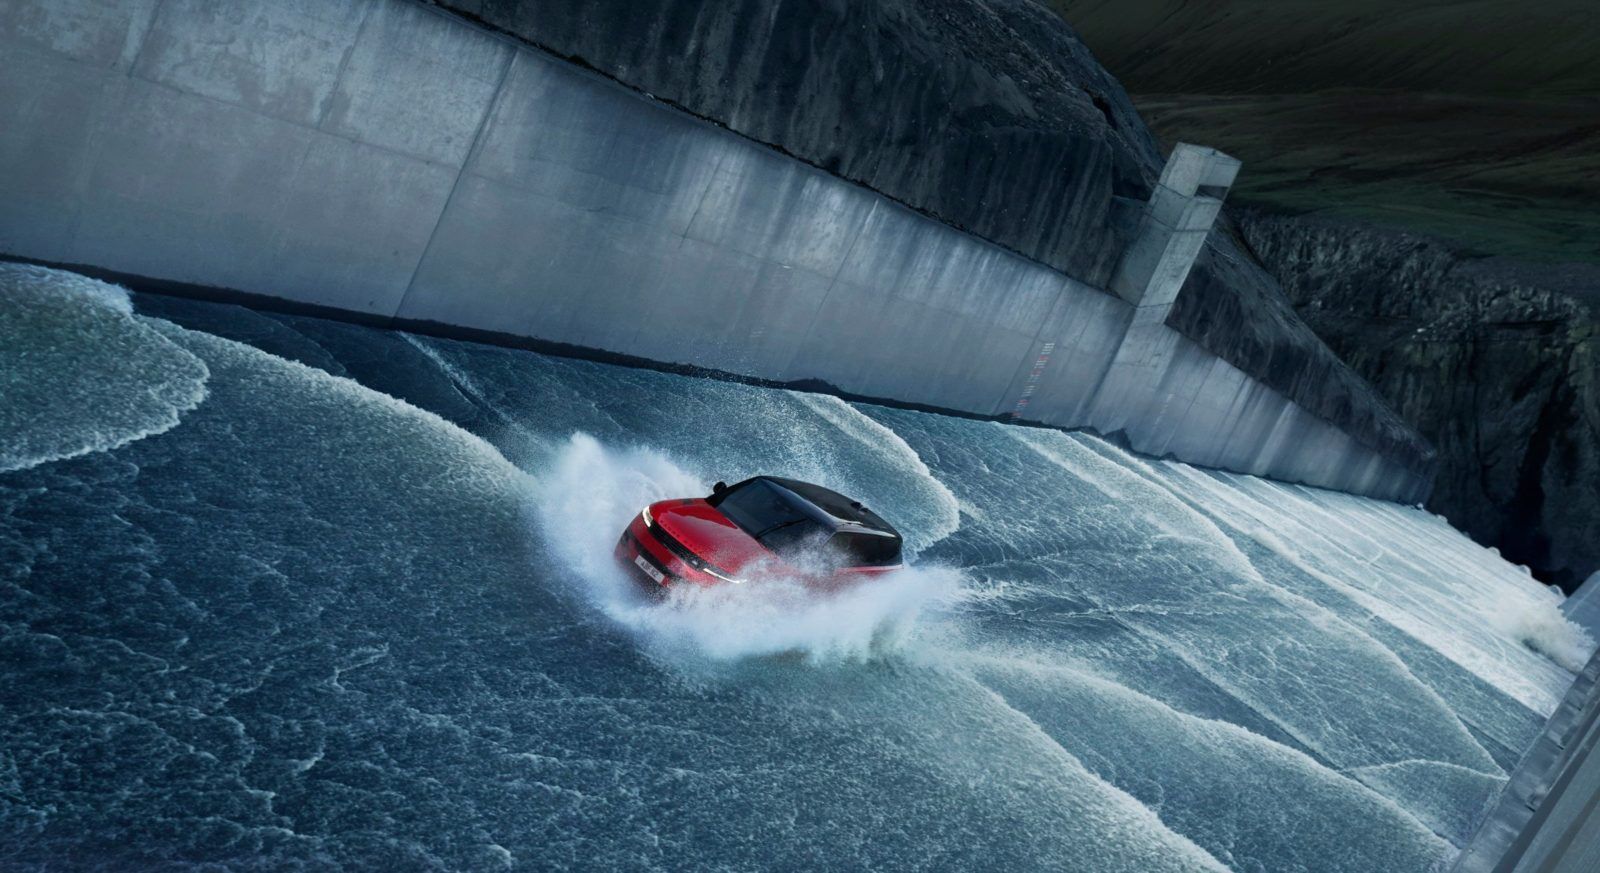 The New Ranger Rover Sport debuts with an epic climb up an Iceland spillway